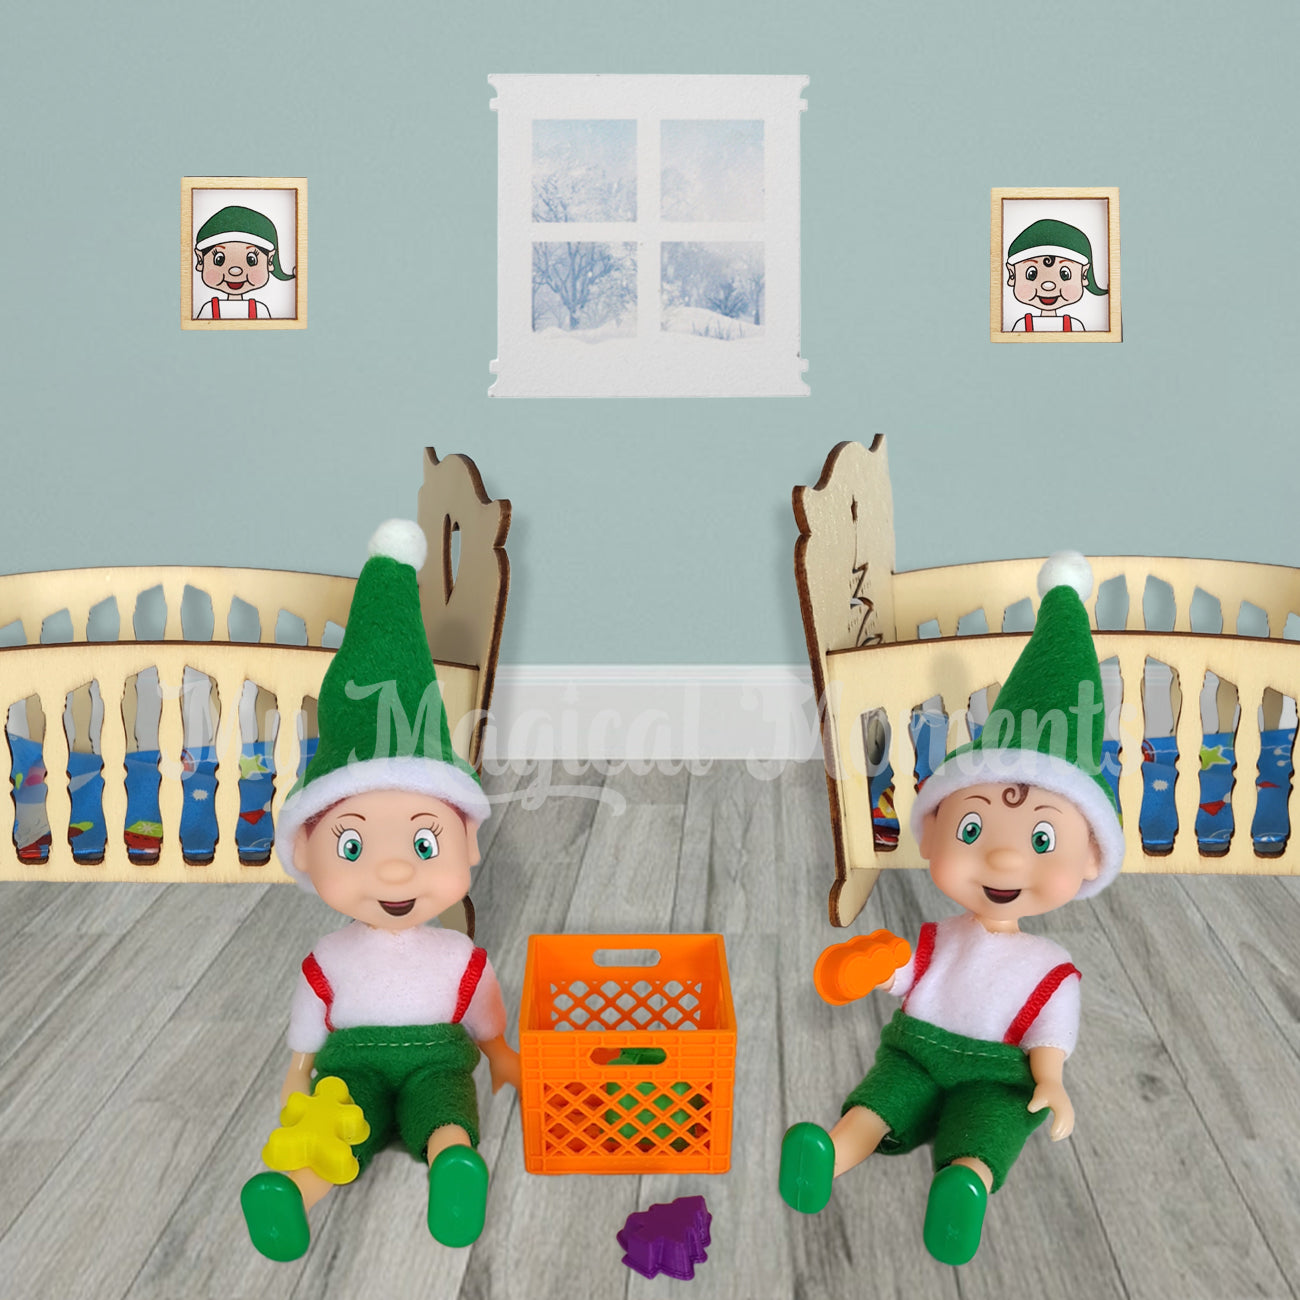 Elf toddlers playing with miniatures toys in their nursery with a cot and milk crate